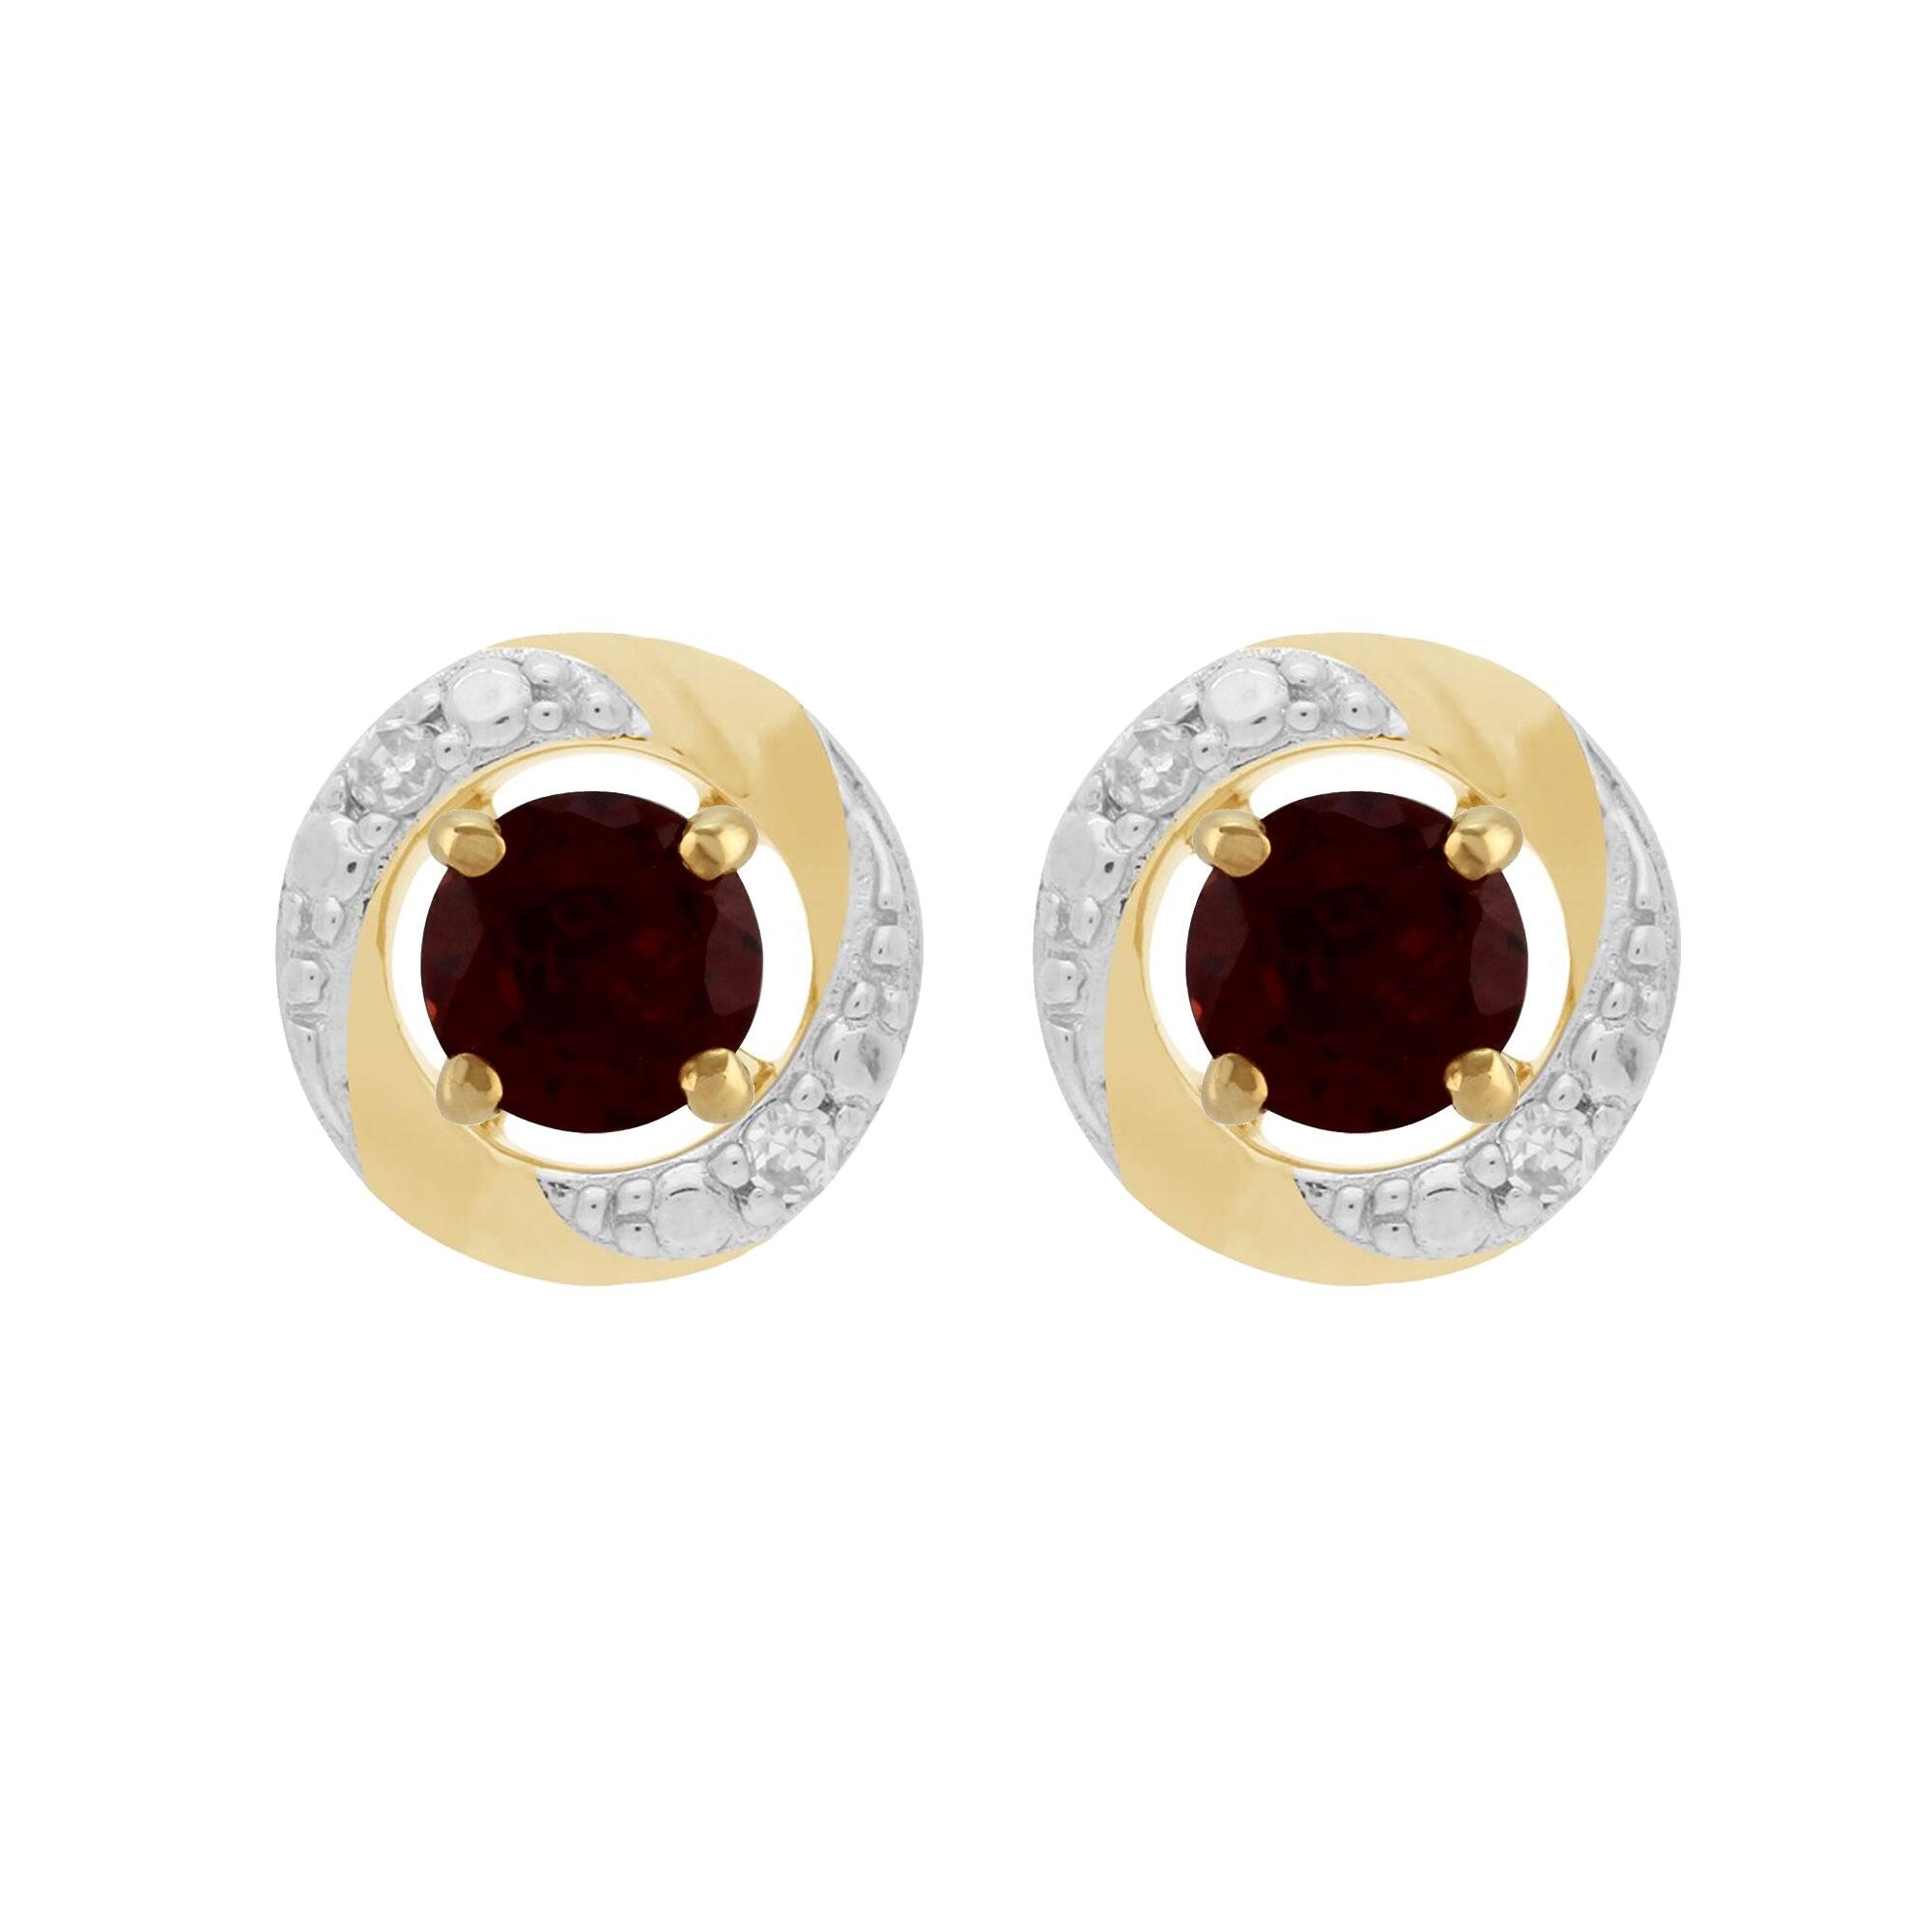 Classic Round Garnet Stud Earrings with Detachable Diamond Halo Ear Jacket in 9ct Yellow Gold